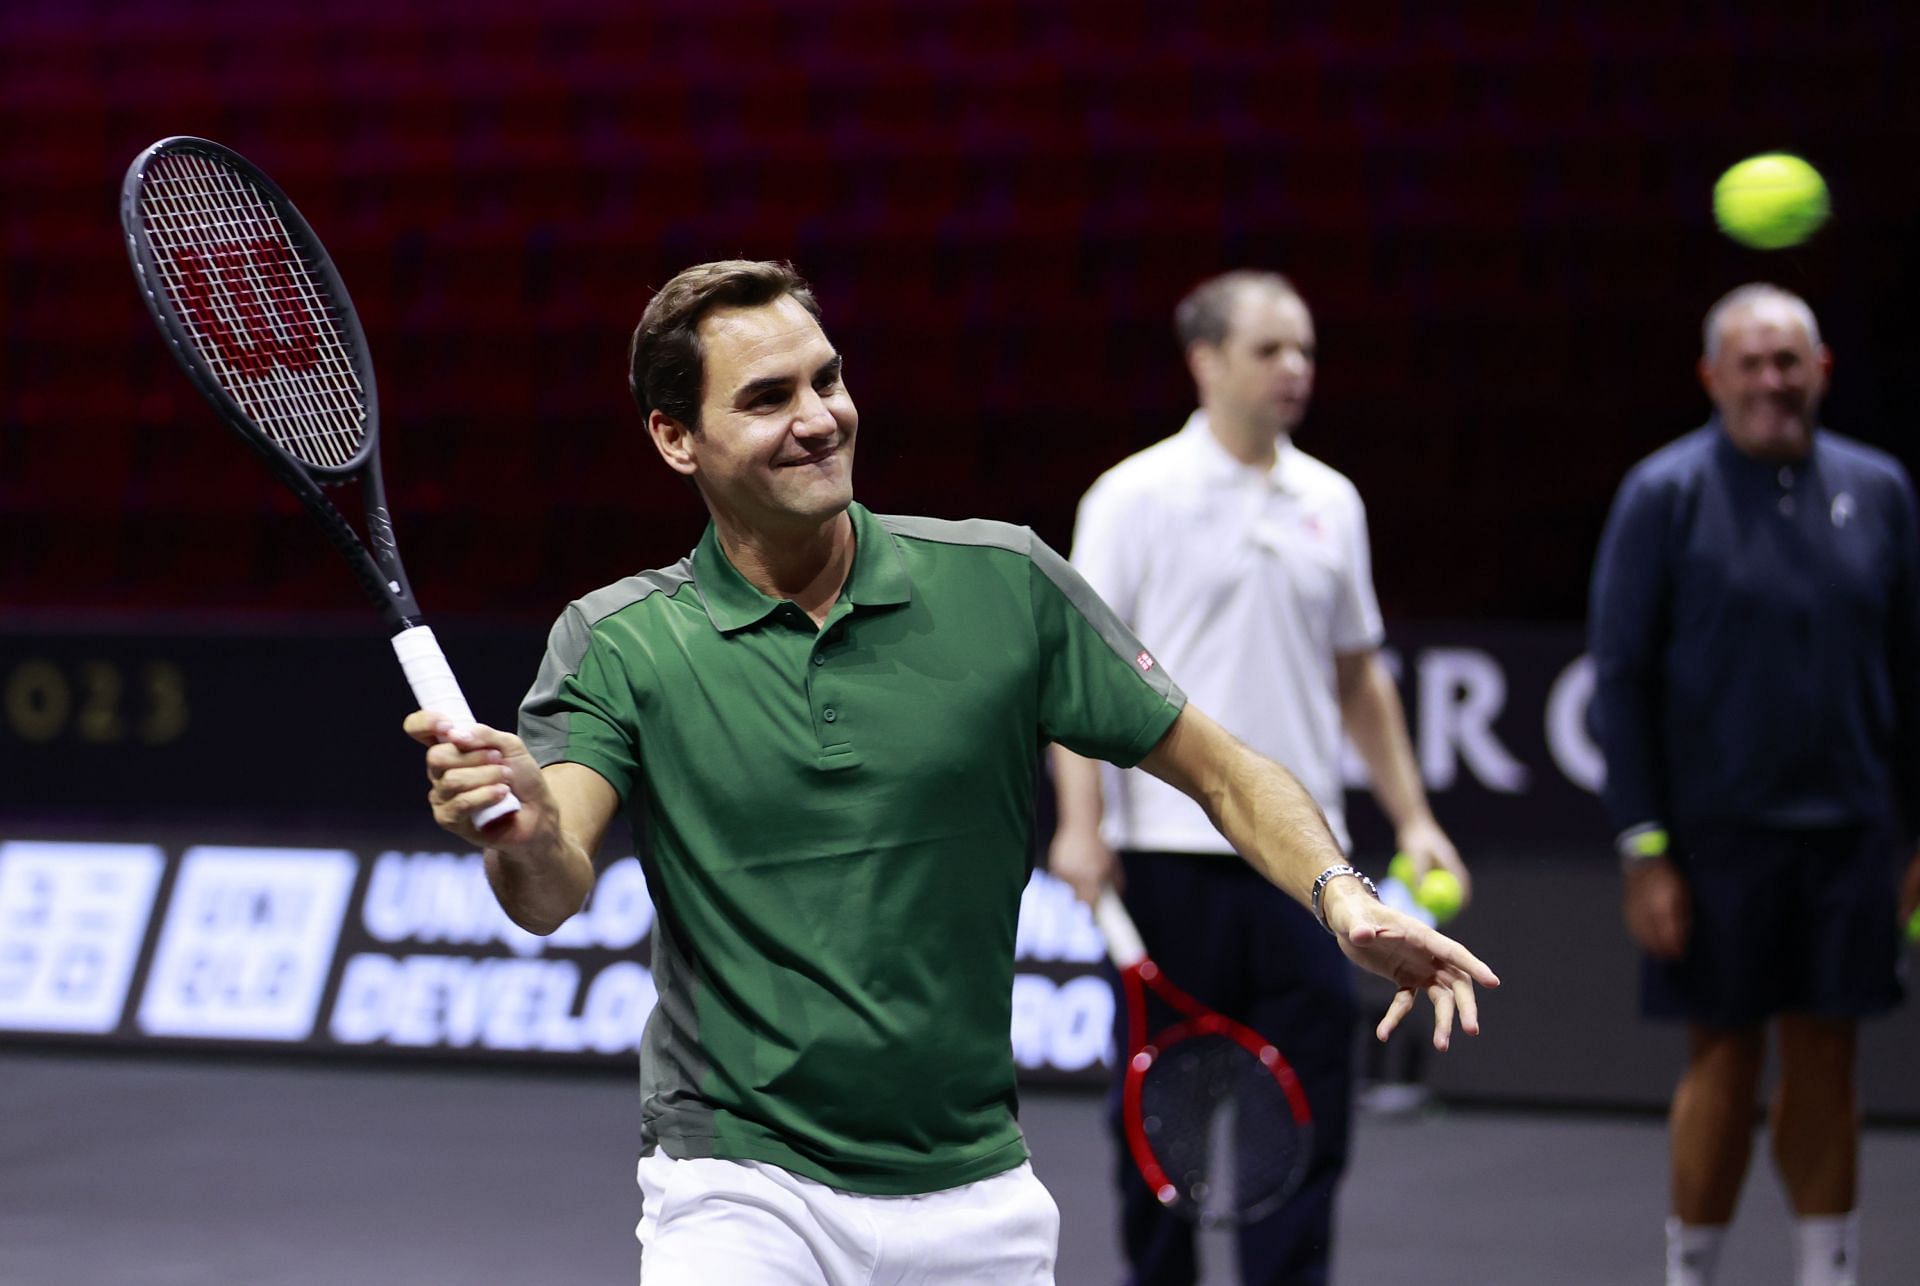 Roger Federer won the Shanghai Masters in 2014 and 2017